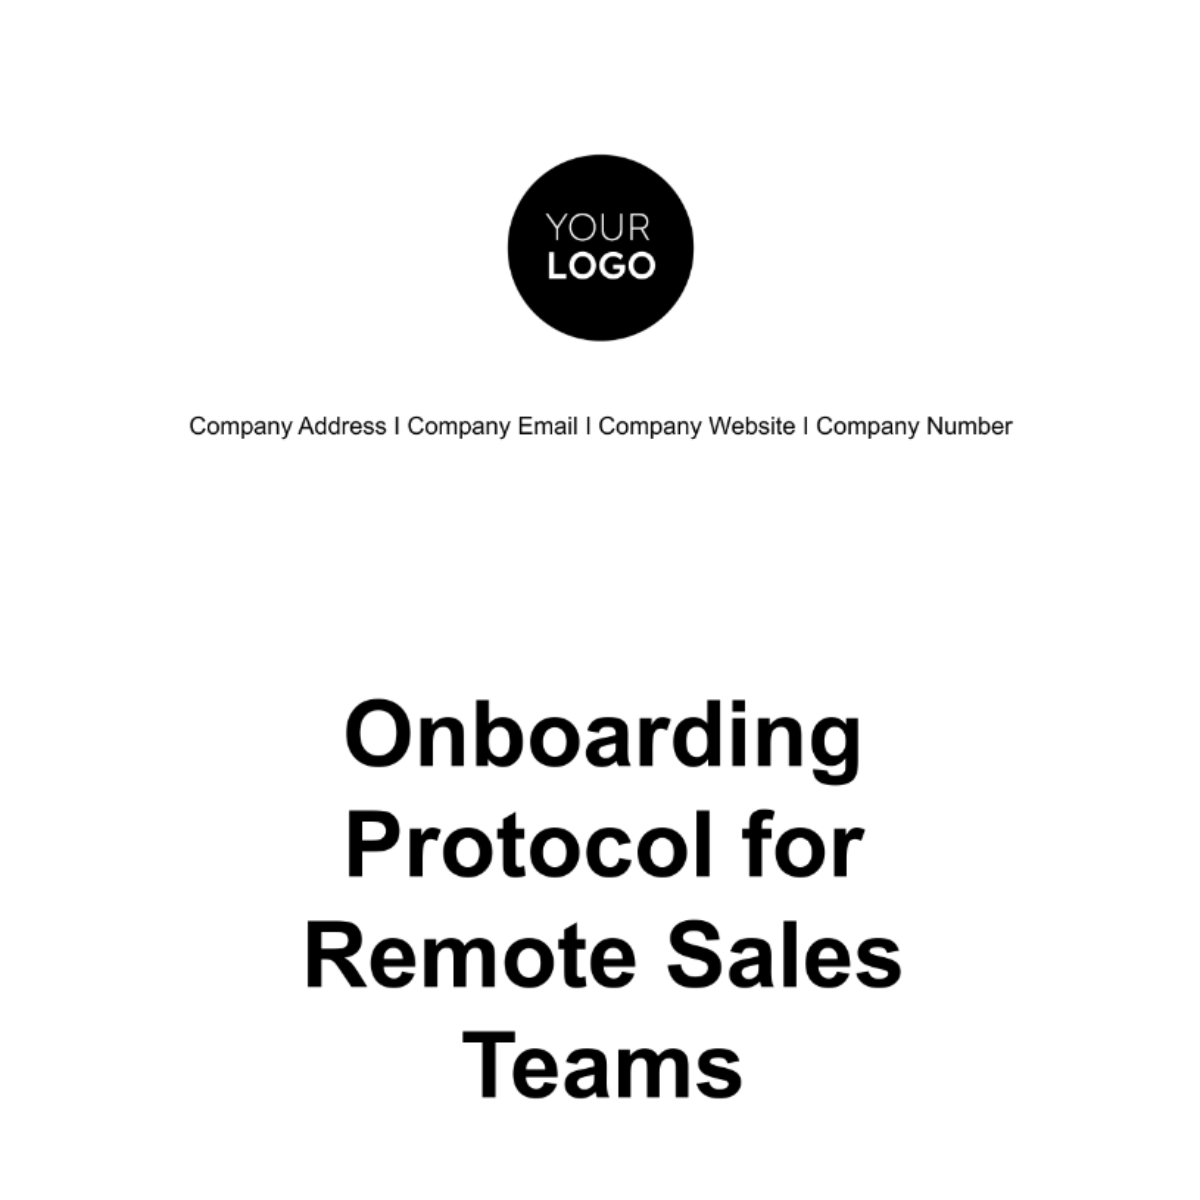 Onboarding Protocol for Remote Sales Teams Template